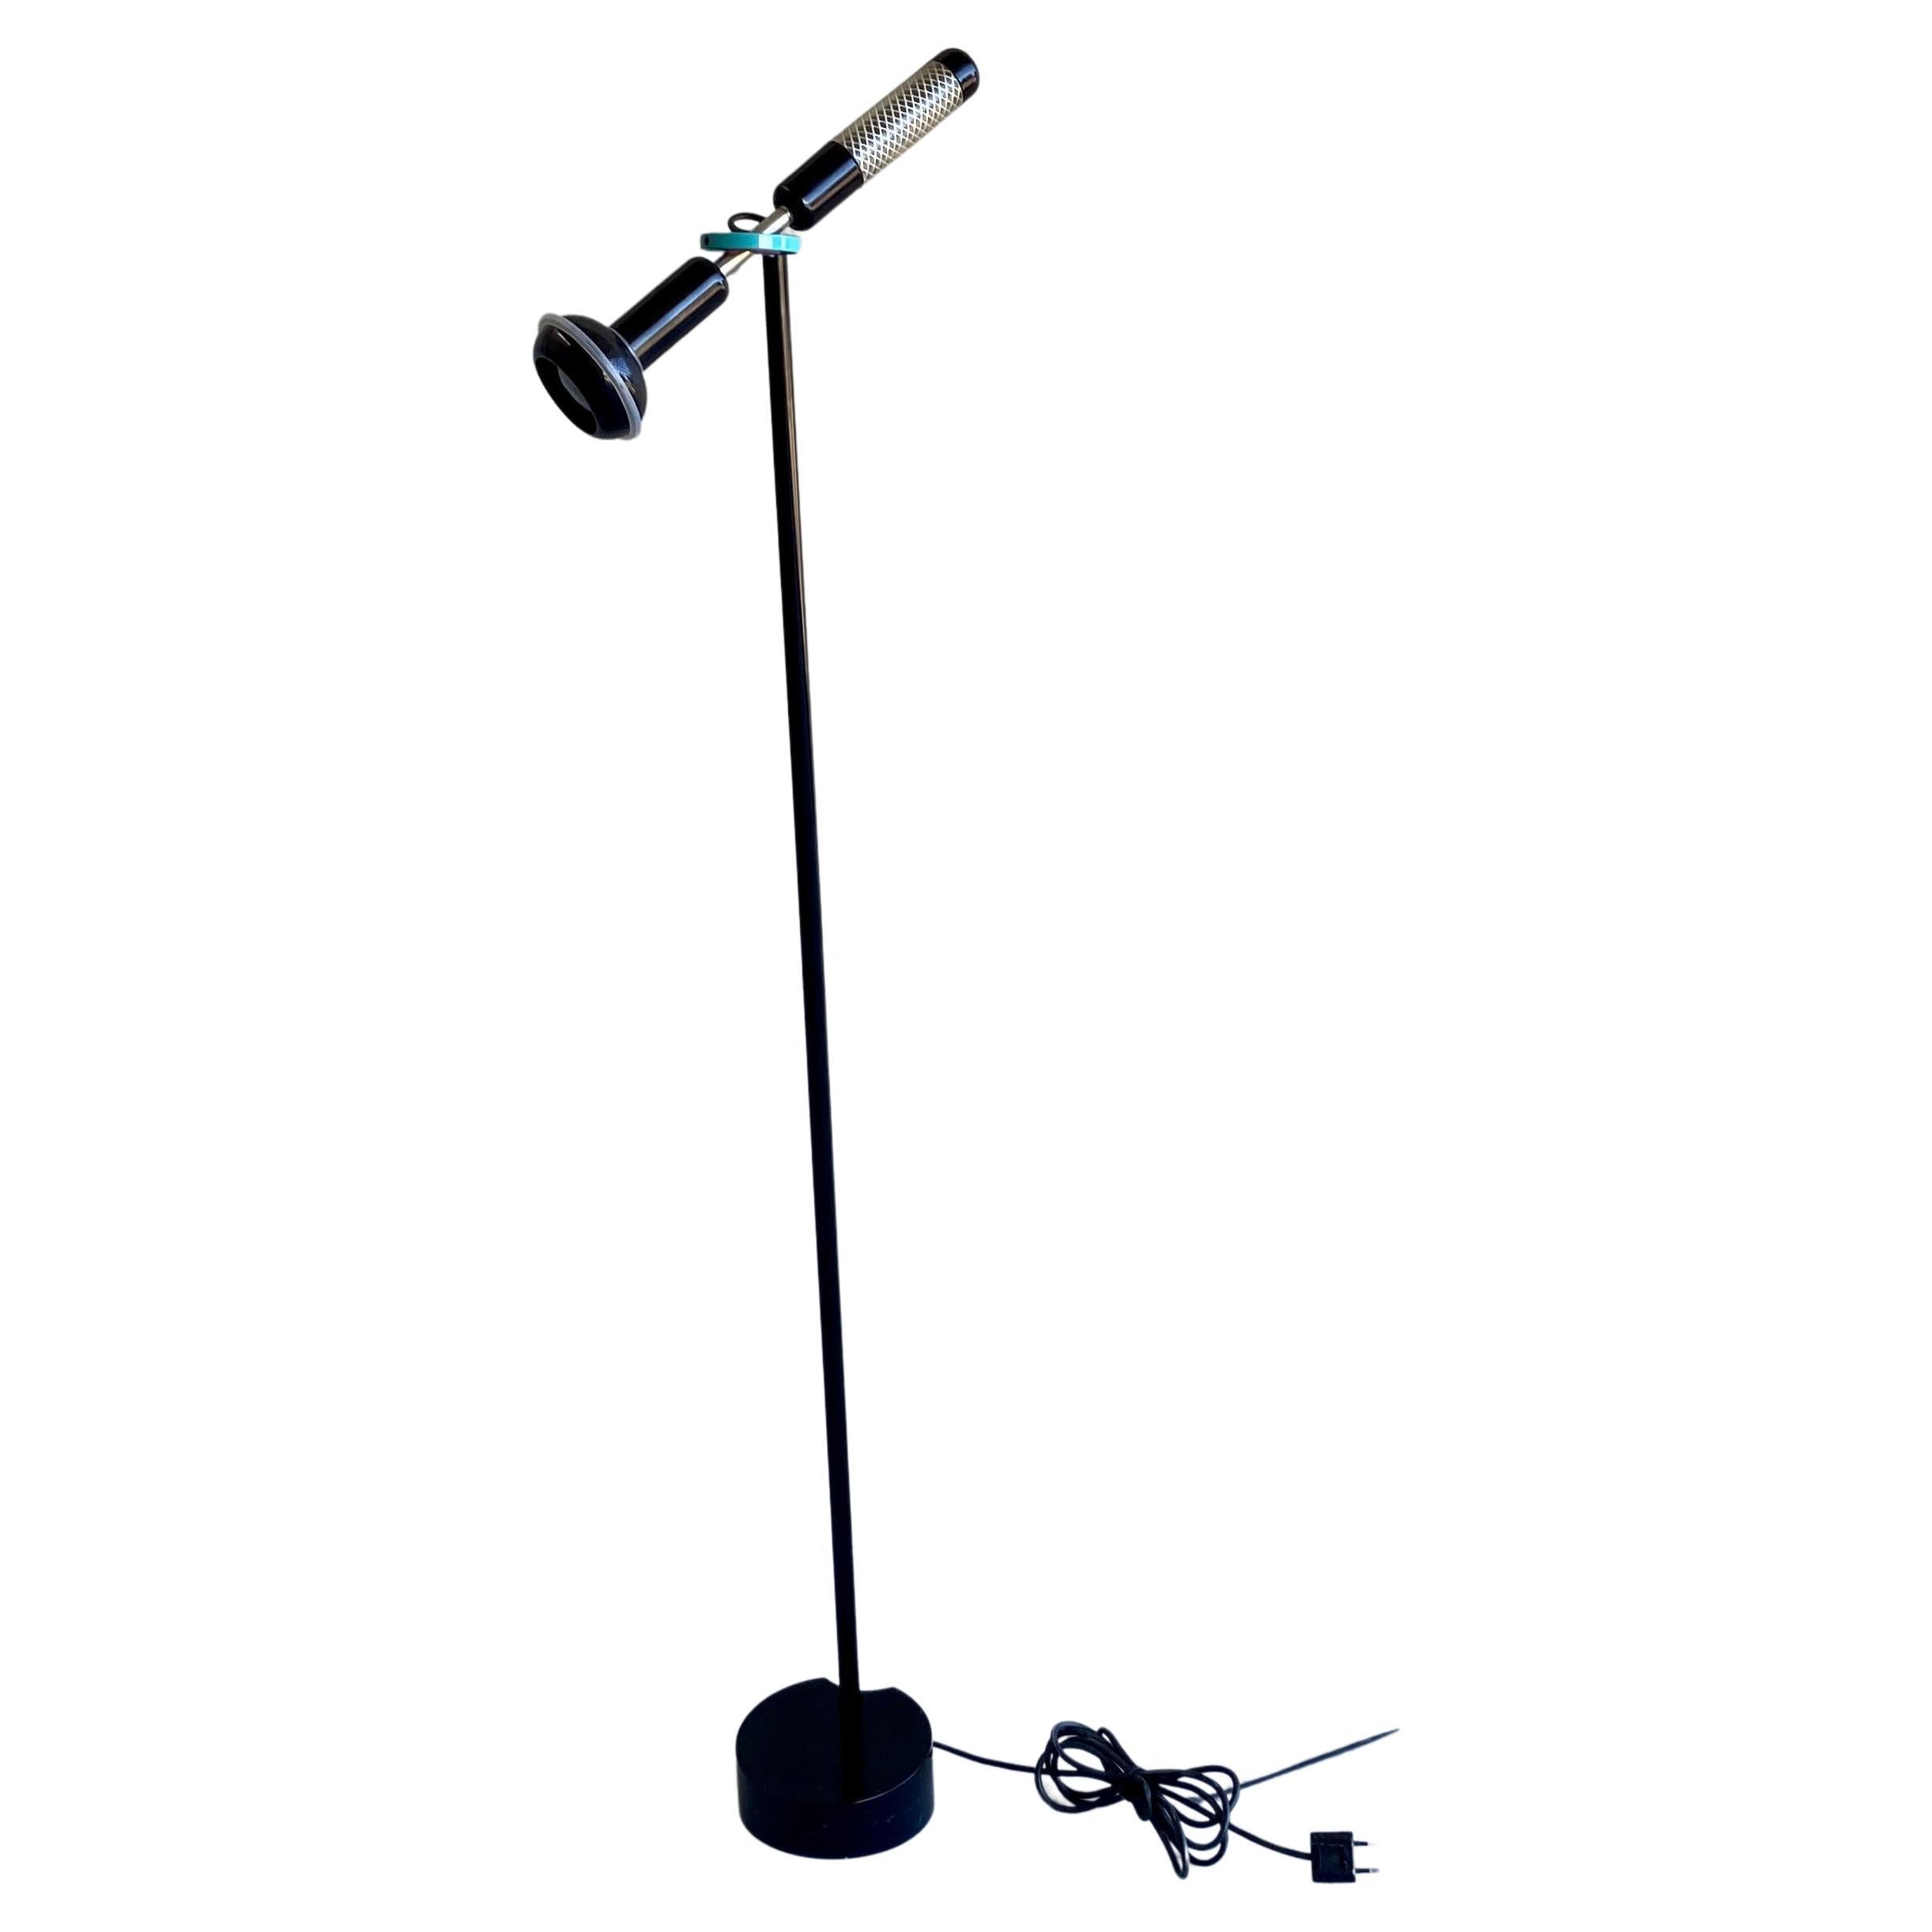 BLACK 'GRIP' FLOOR LAMP BY ACHILLE CASTIGLIONI FOR FLOS, 1980S

Looking for a statement piece to elevate your home decor? Look no further than the Black 'Grip' Floor Lamp by Achille Castiglioni for Flos, originally designed in the 1980s and now